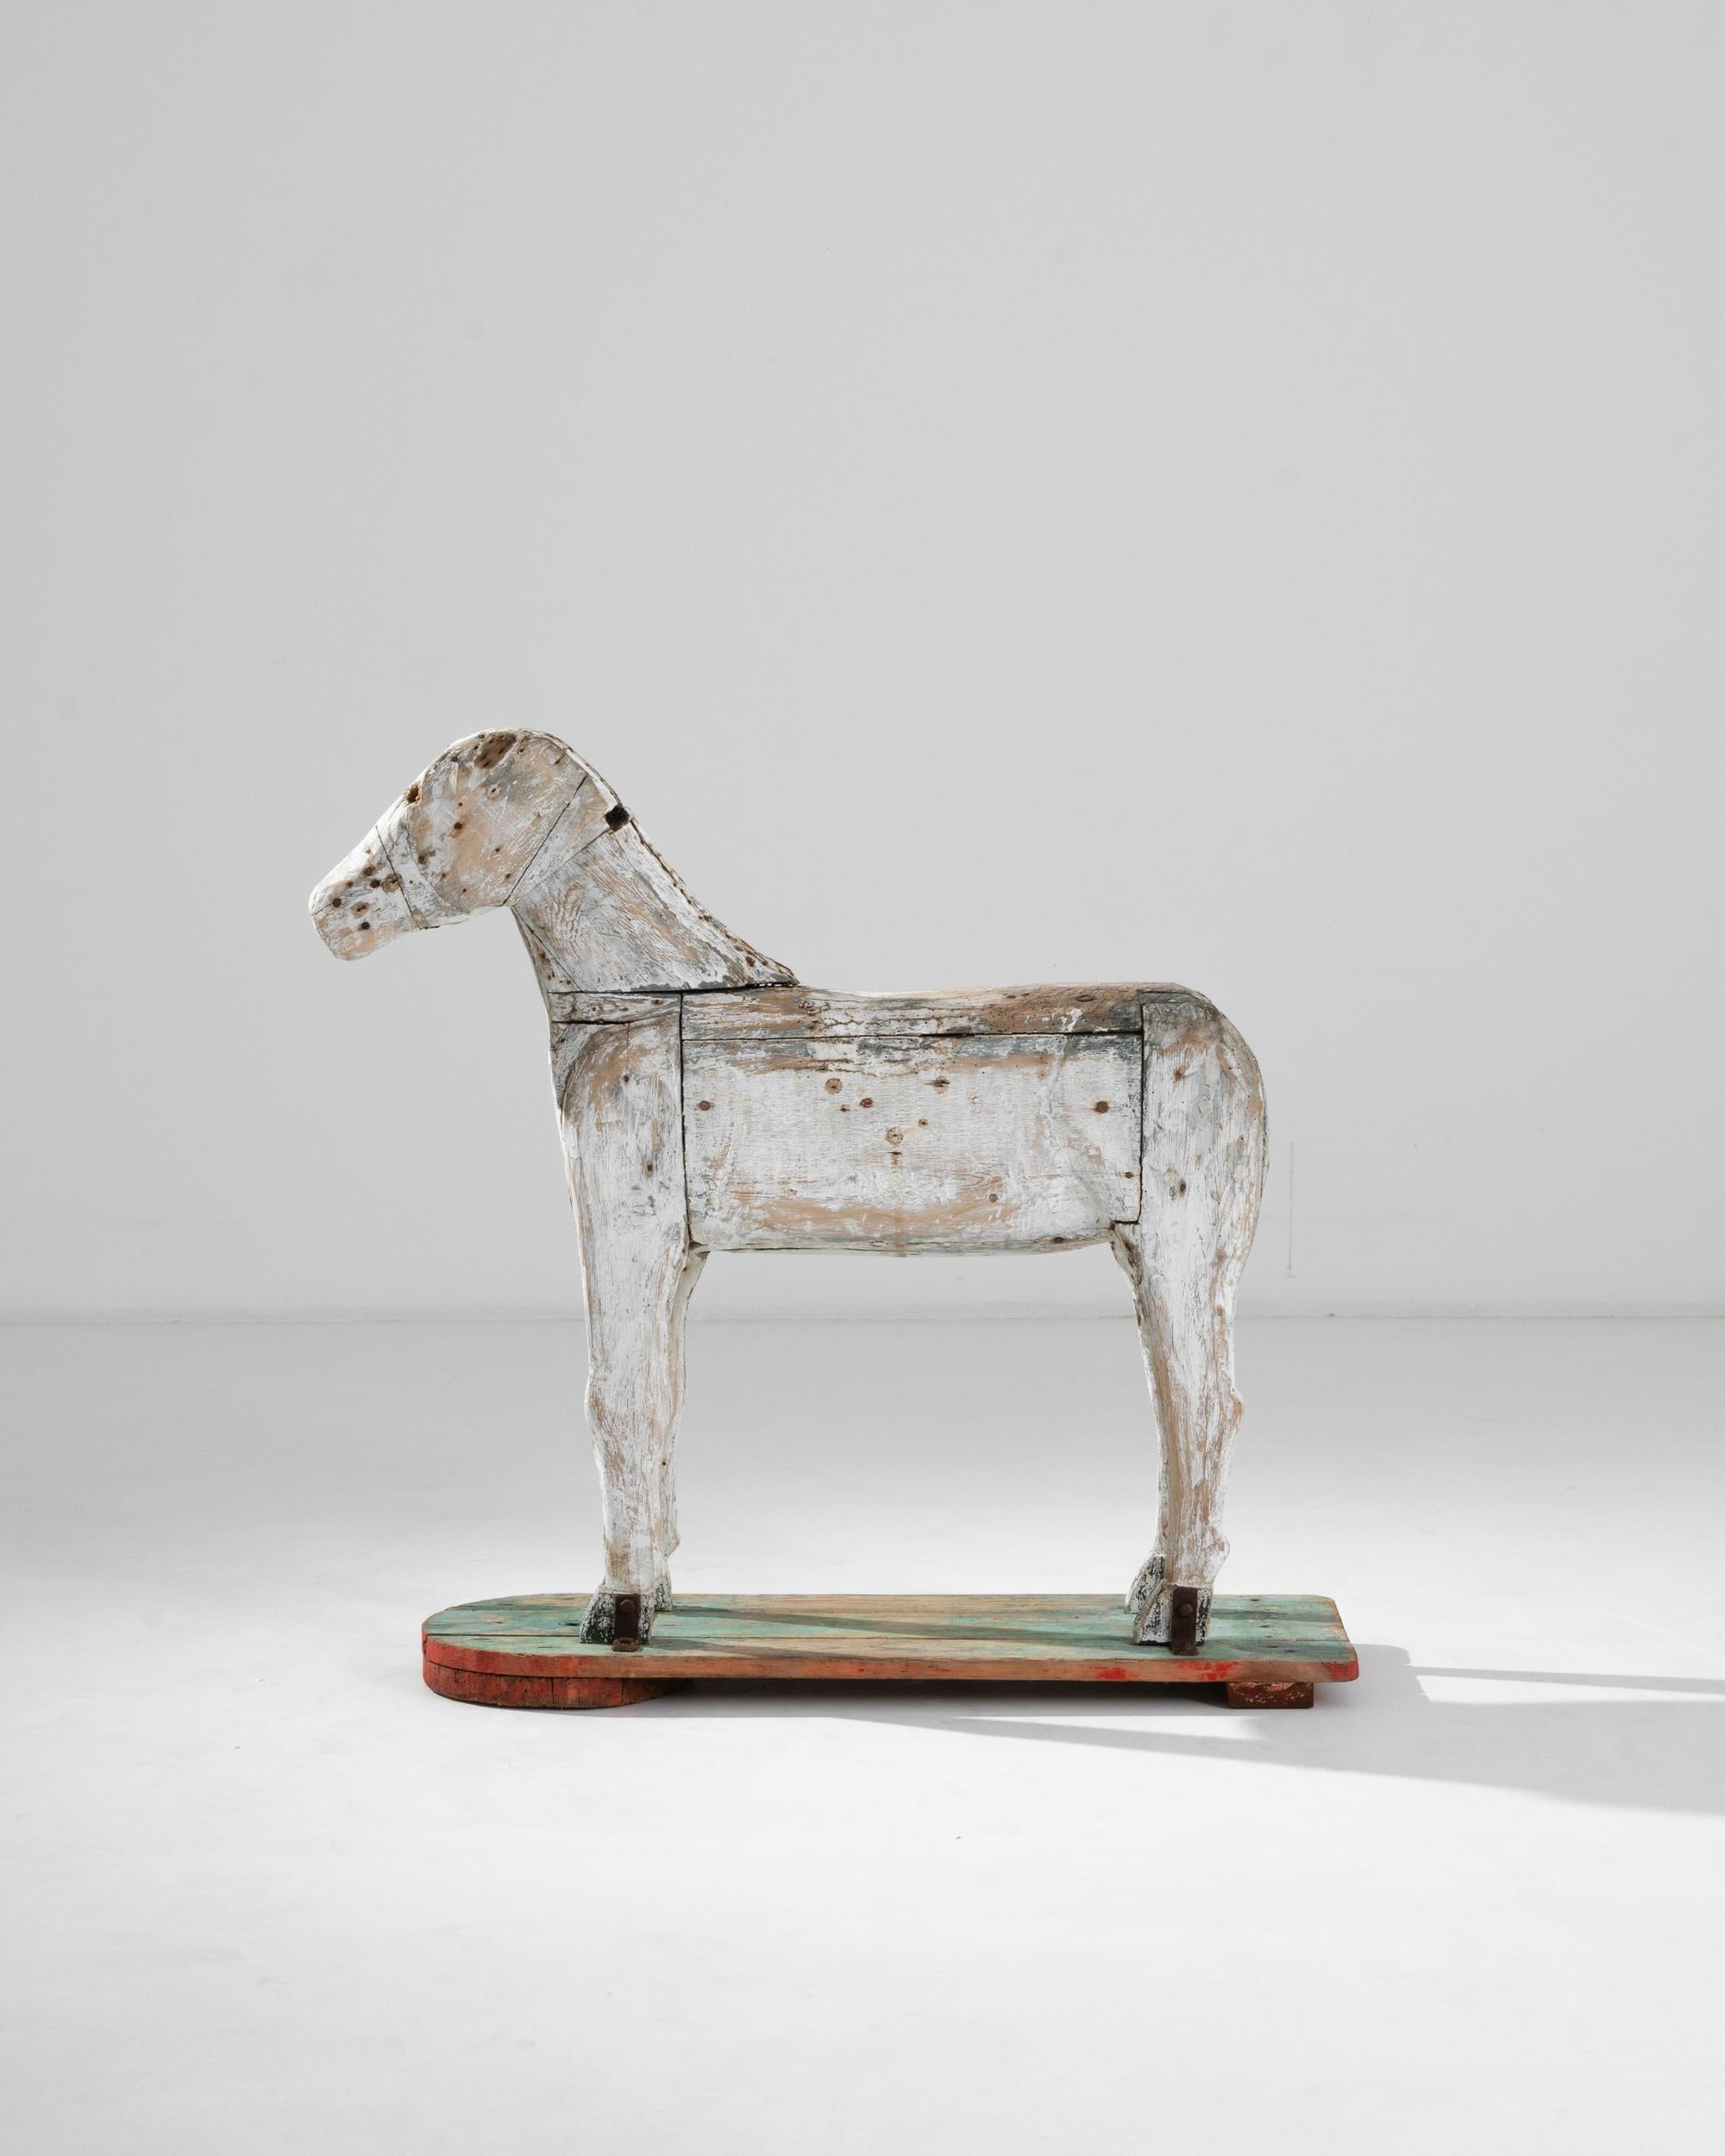 Like a mysterious inhabitant of a fairy tale by Hans Christian Andersen, this wooden quadruped crafted in Scandinavia circa 1900 exudes a gentle melancholy of the North. The whiteness of its firmly built body contrasts with the bright green and red